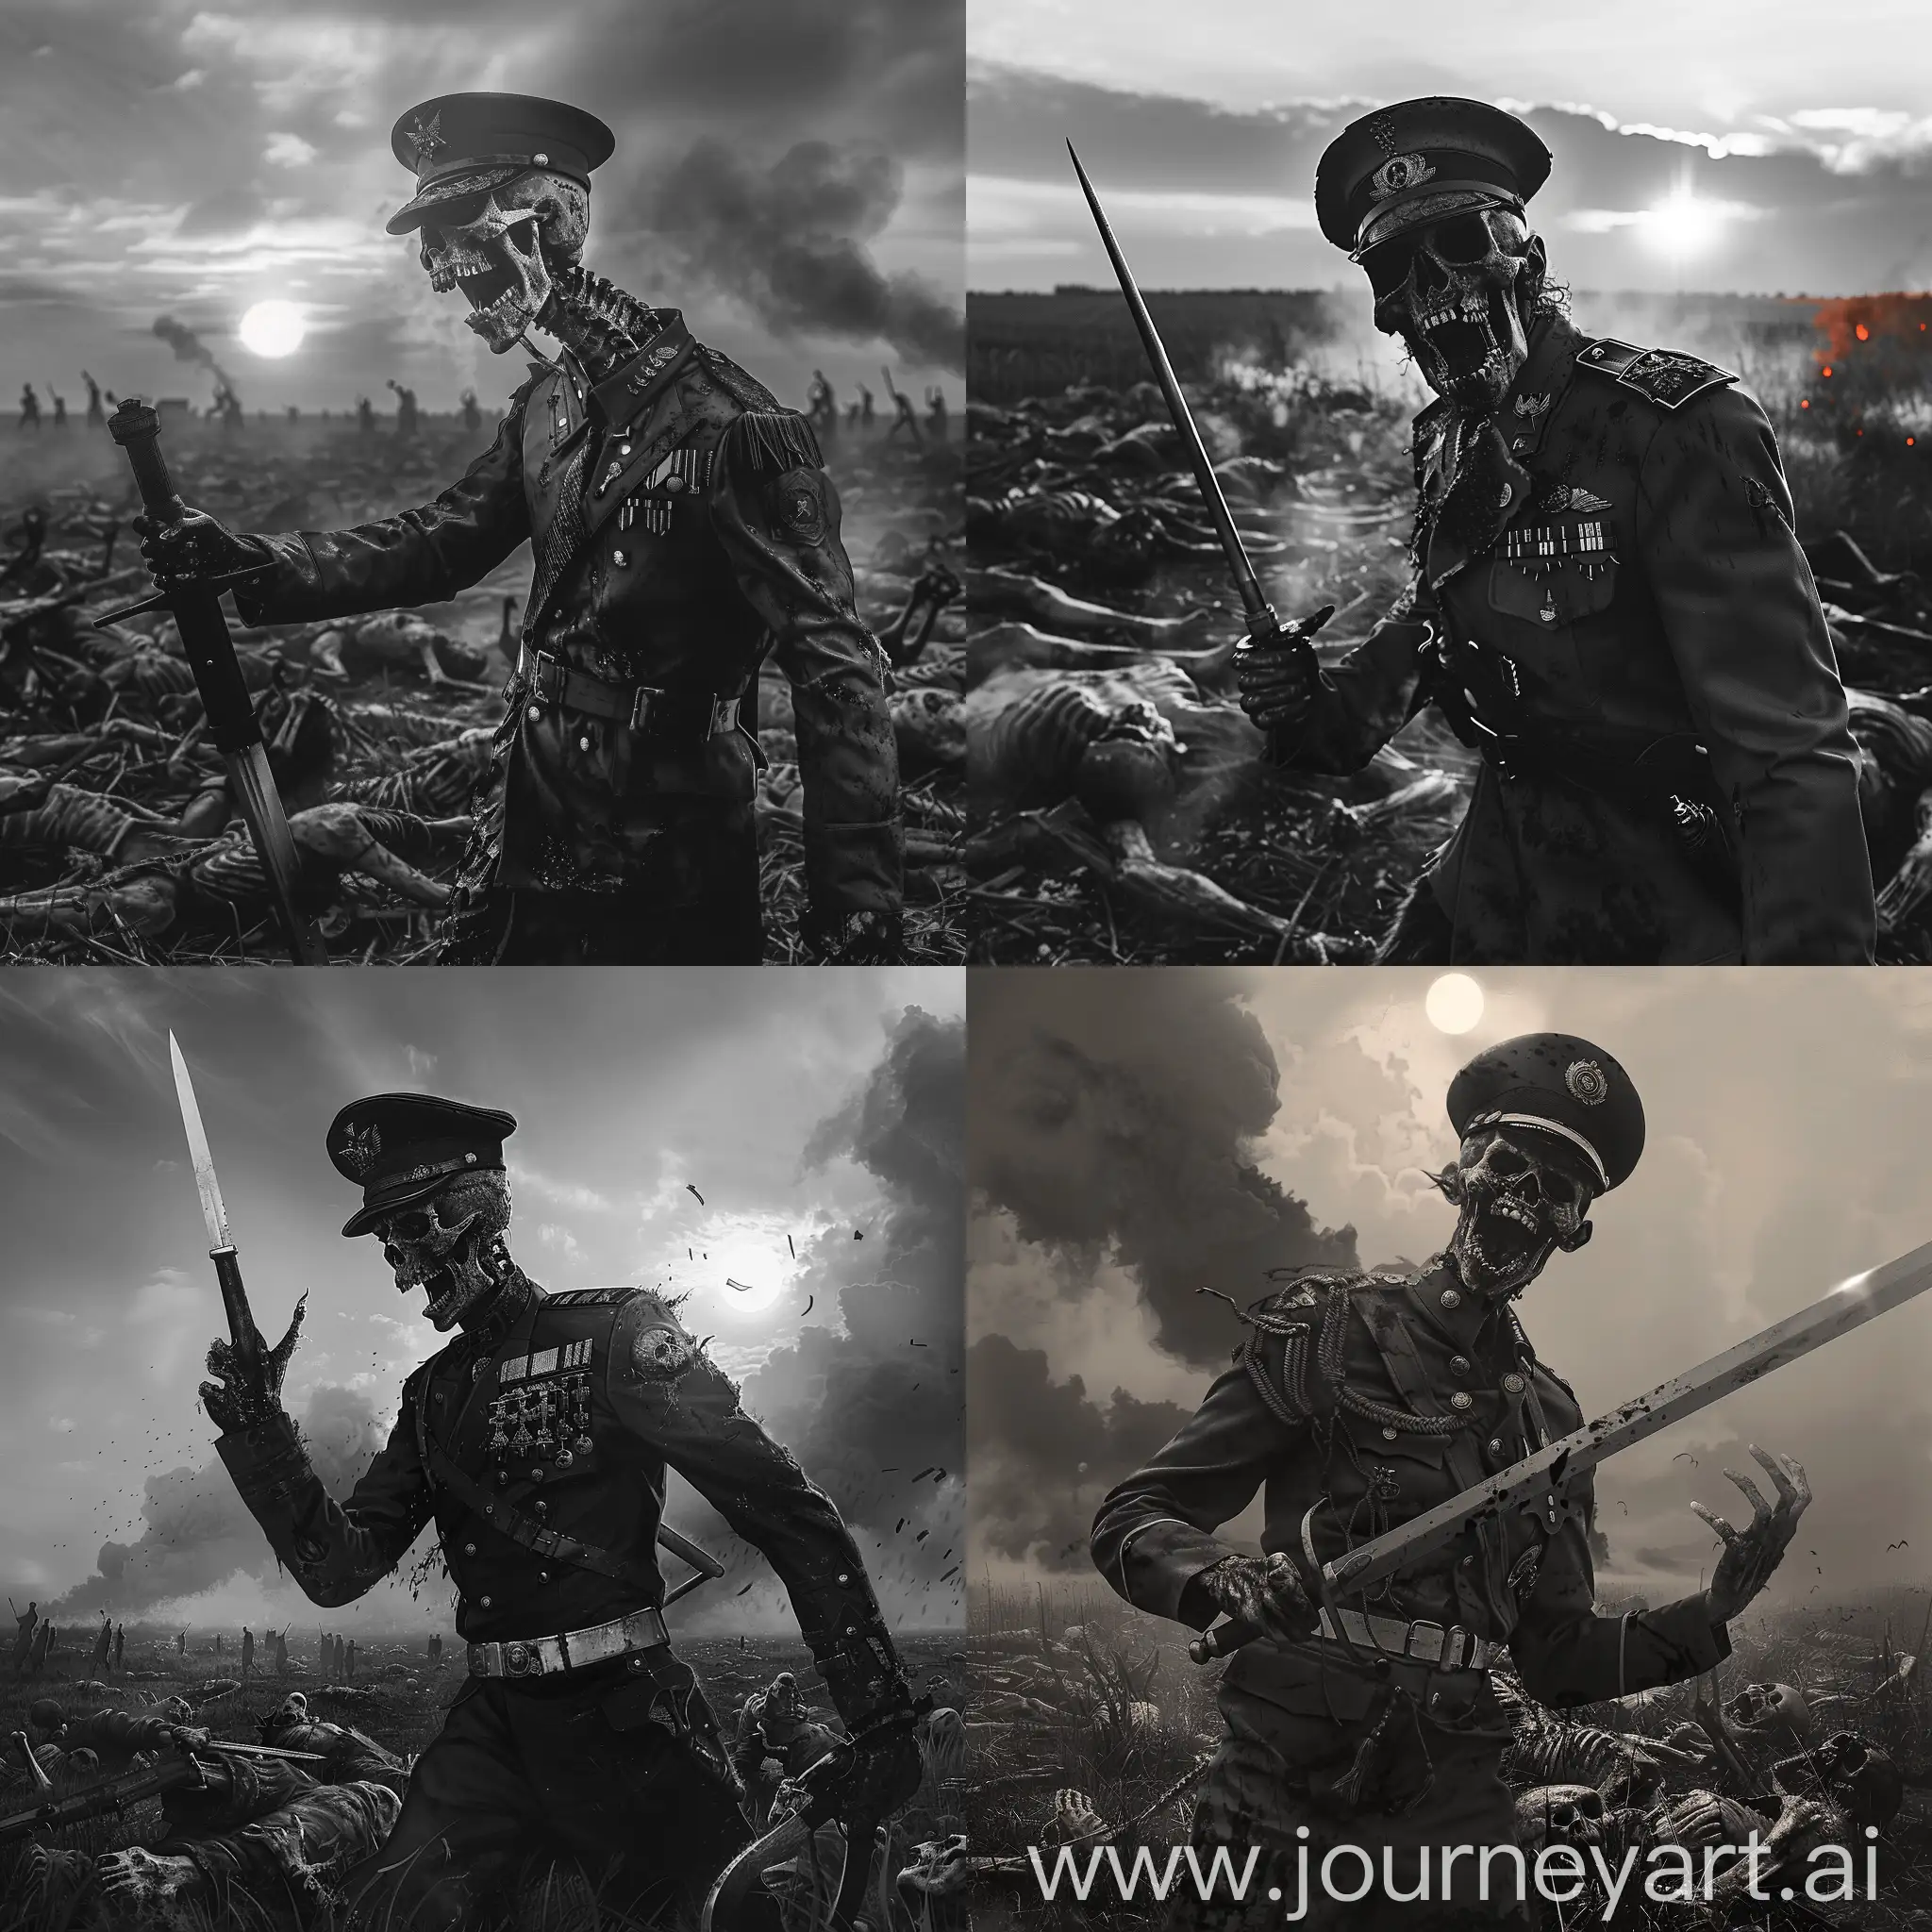 undead with officer's saber in hand with an officer's cap, screaming skull, officer uniform, army, black sun, burned field, field full of dead bodies, smoke, smog, madness, monochrome